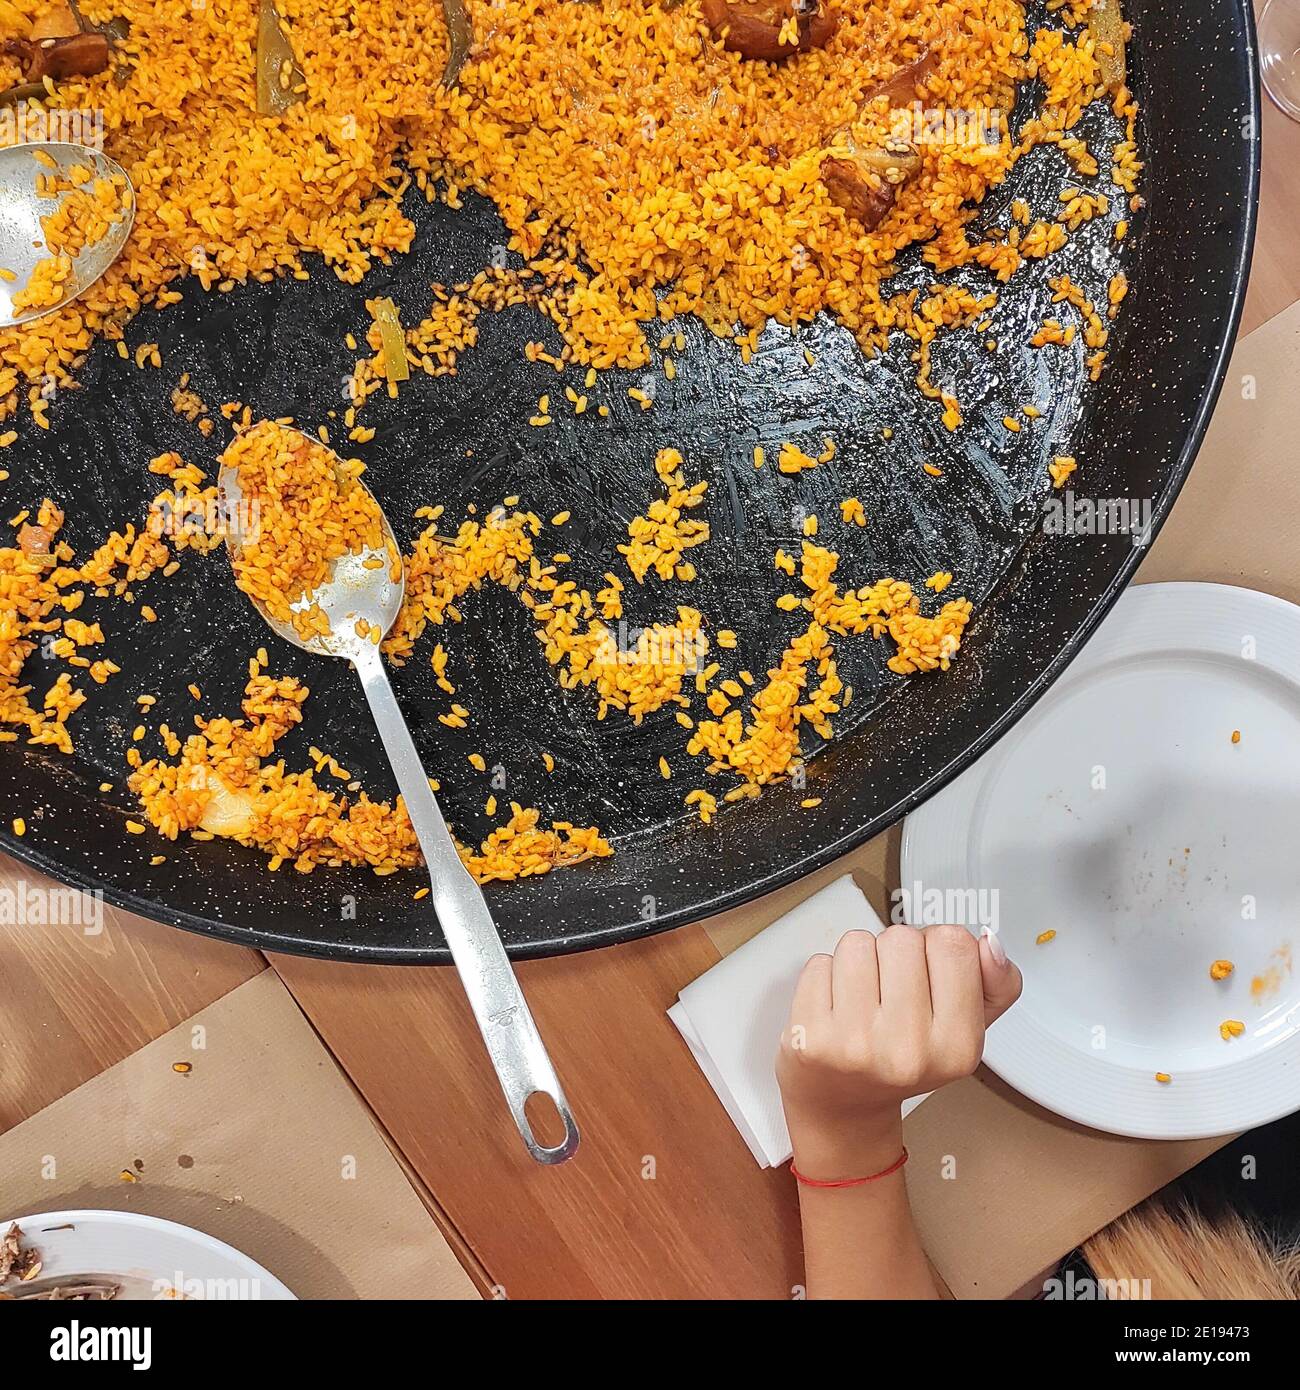 Yellow paella rice top view with a spoon Stock Photo